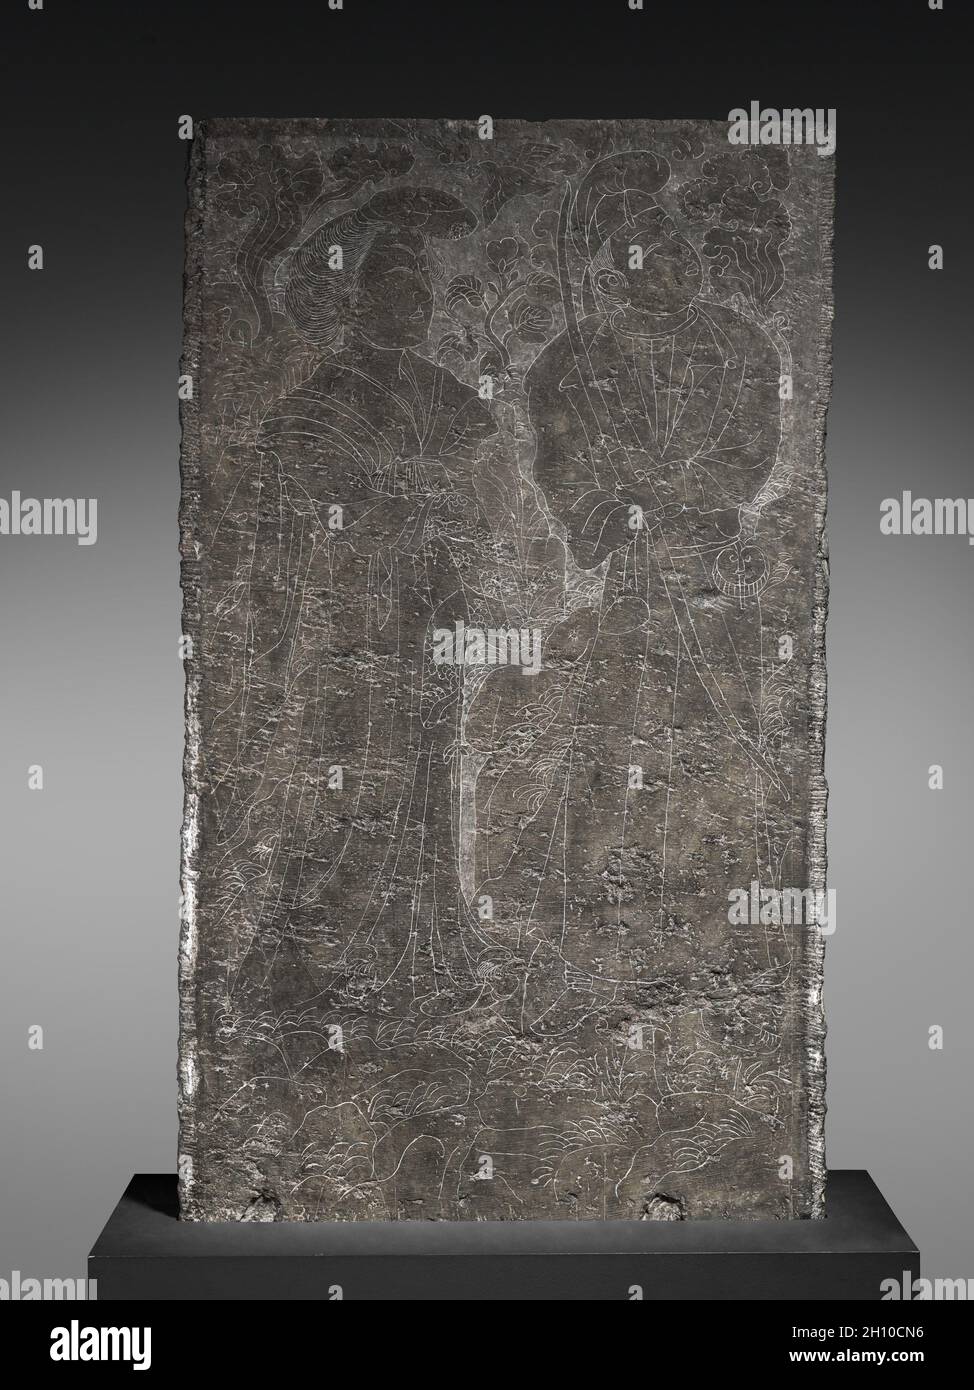 Sarcophagus Panel, early 8th Century. China, Tang dynasty (618-907). Limestone; overall: 119 x 69 x 10 cm (46 7/8 x 27 3/16 x 3 15/16 in.).  This slab originally formed the 'window' panel of a coffin encasement constructed to resemble a one-story house. The dwarfs bowing respectfully under the vertical lattice window, as well as the court lady and archer engraved on the reverse, reflect the style of contemporary figure painting. Complete structures with similar decor have been excavated from tombs in the Tang imperial cemetery near Sian in northwest China. Stock Photo